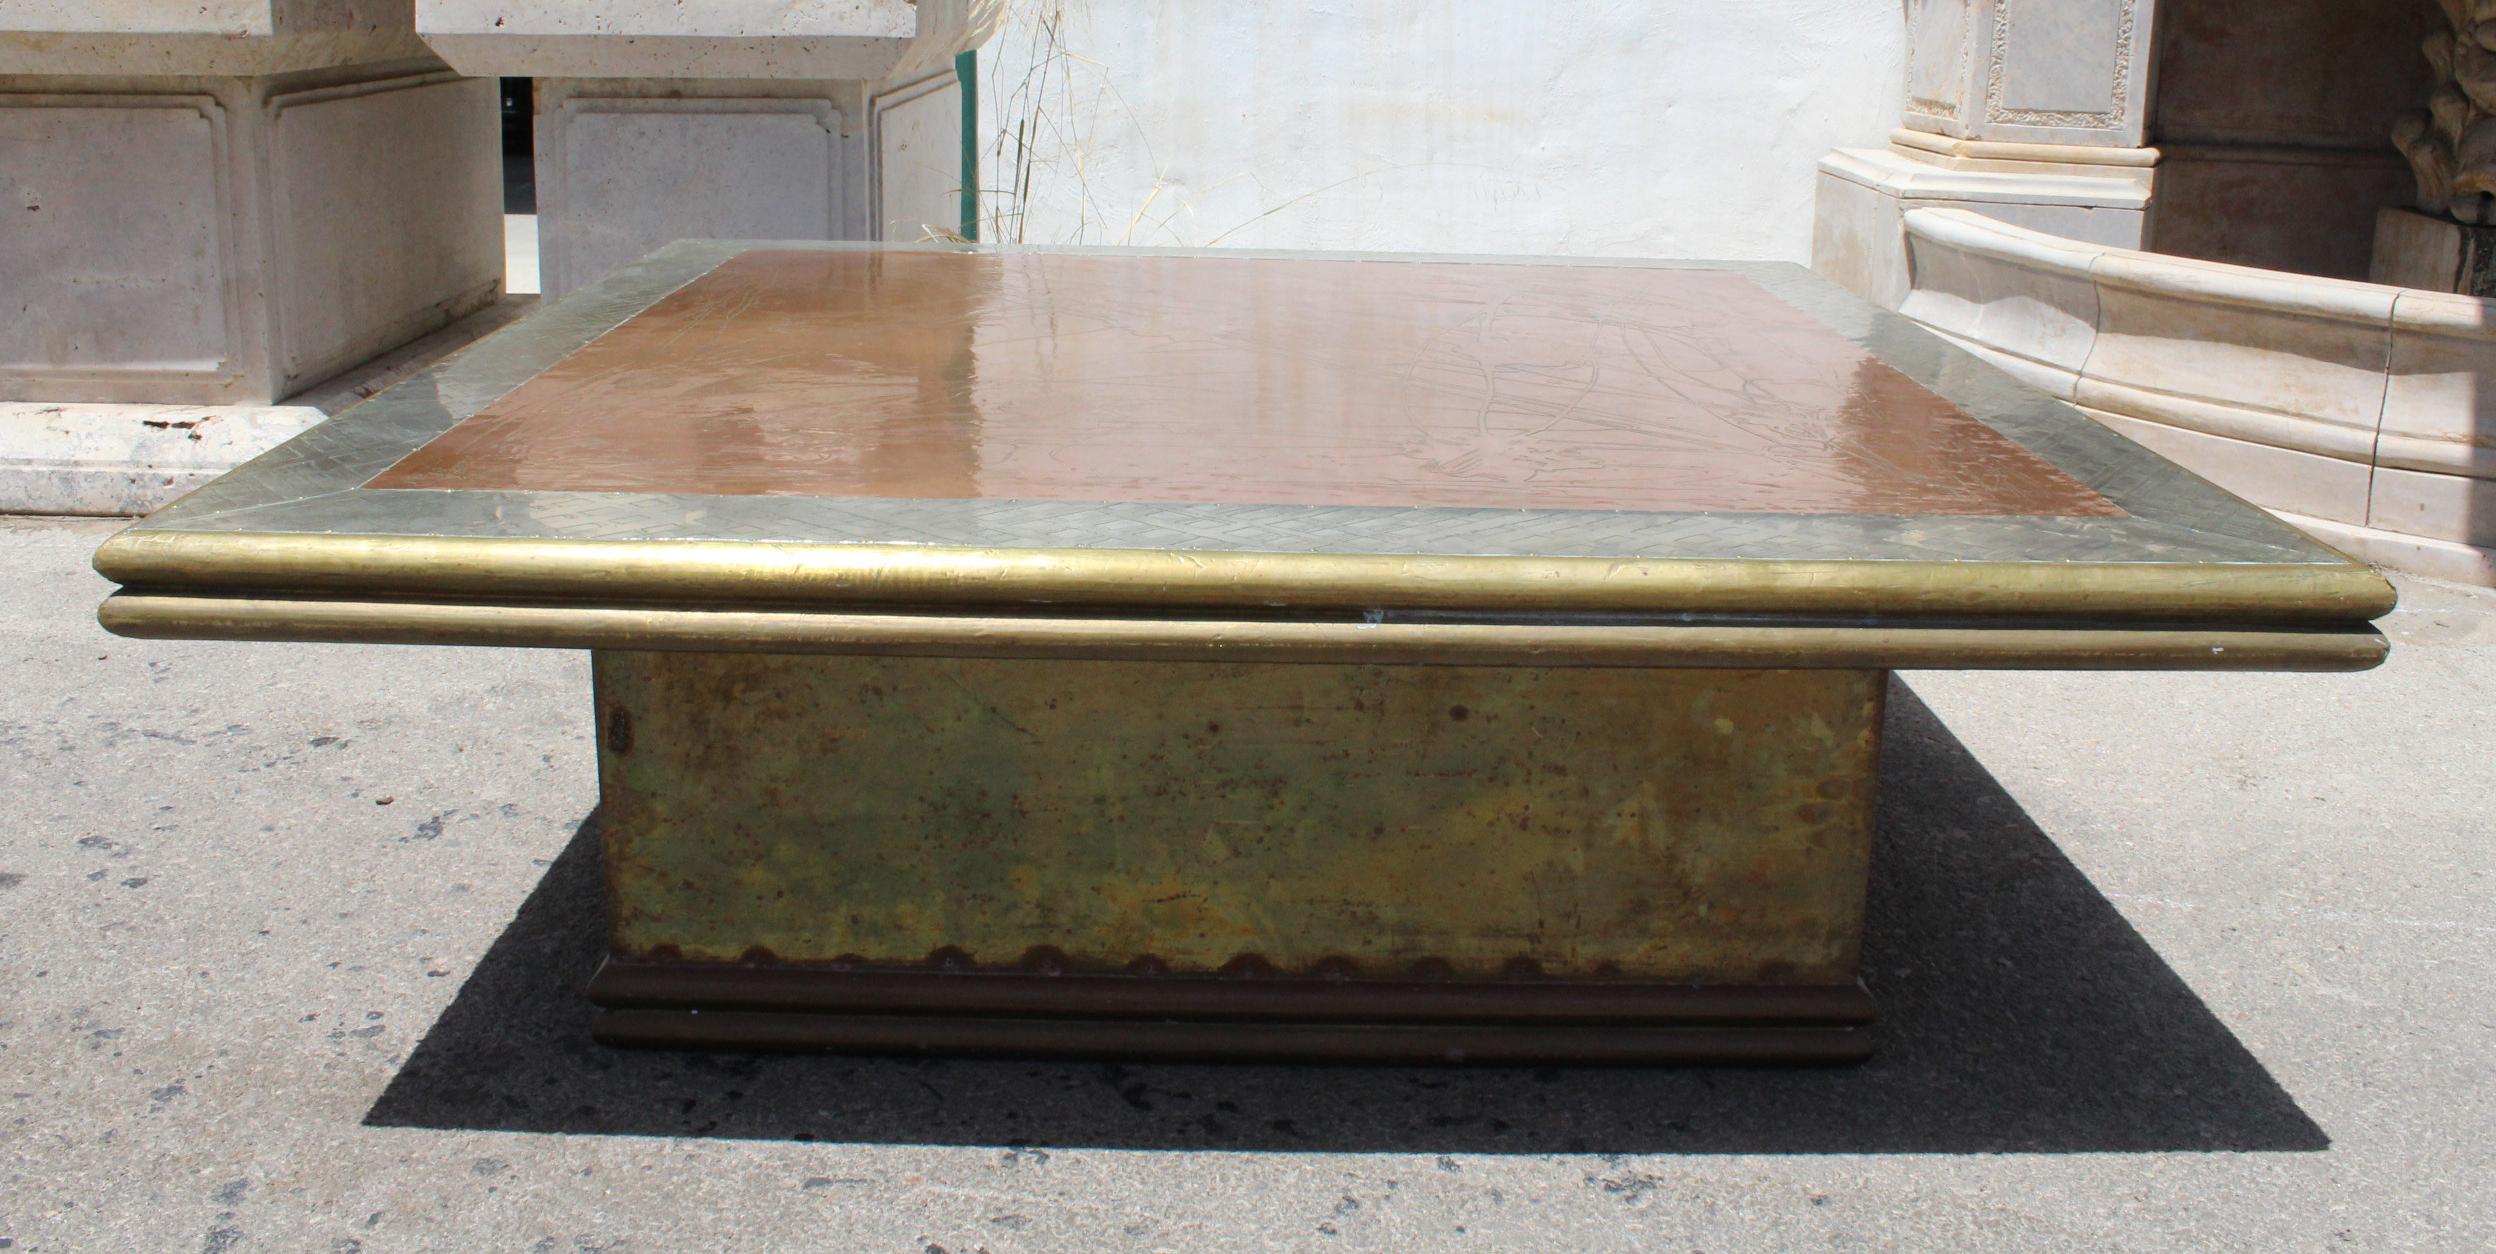 1980s gilded brass coffee table by Rodolfo Dubarry who set up his workshop in Marbella, where we are based. Gilded brass hand worked over a wooden frame. We have many examples of his work.